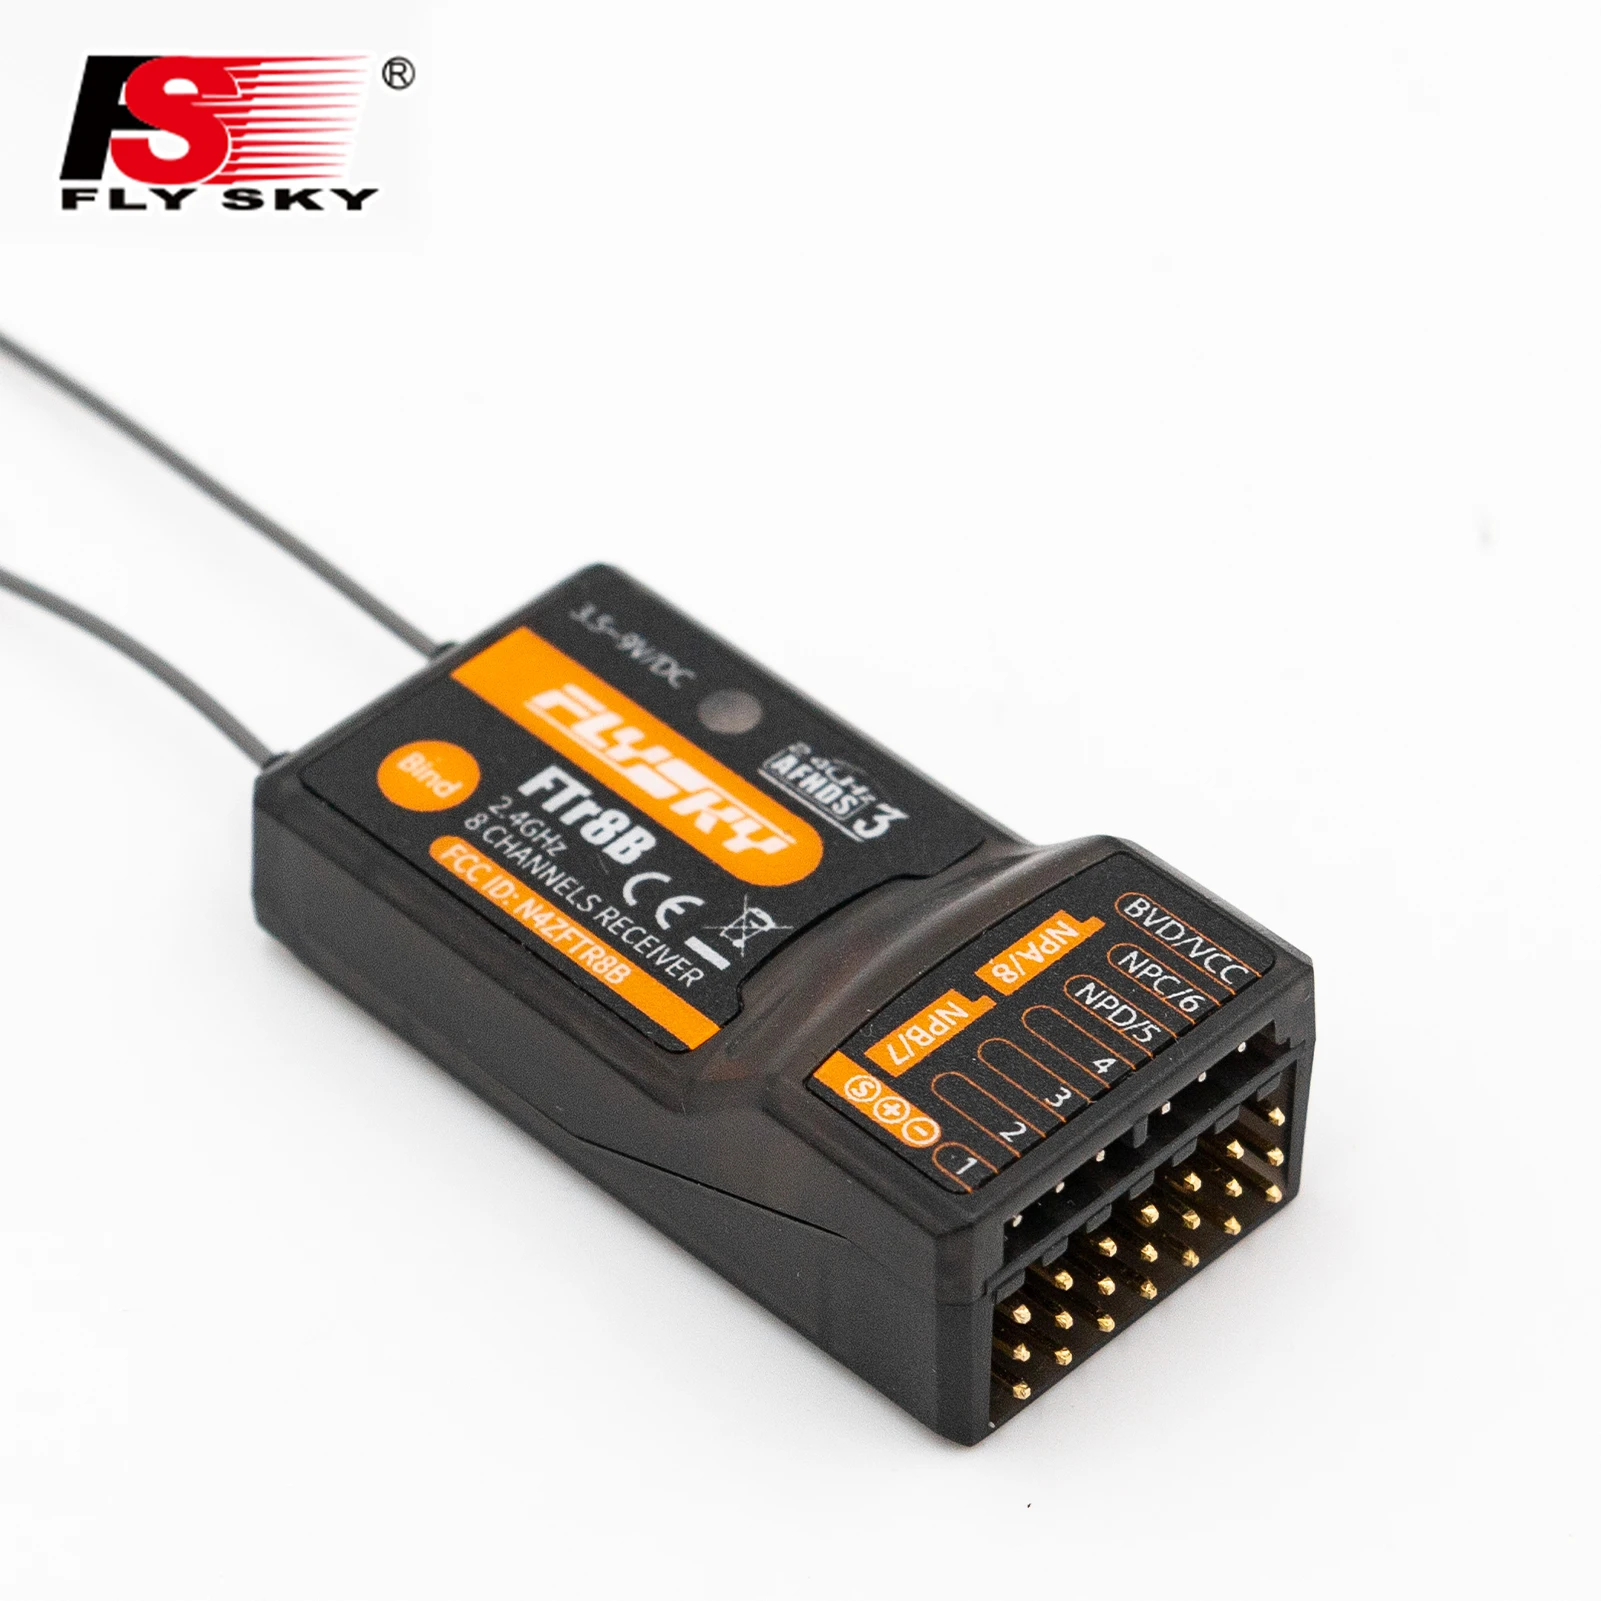 FlySky FTr8B 2.4GHz 8CH Receiver for RC Airplane Helicopter Fixed Wing Glider - £45.58 GBP